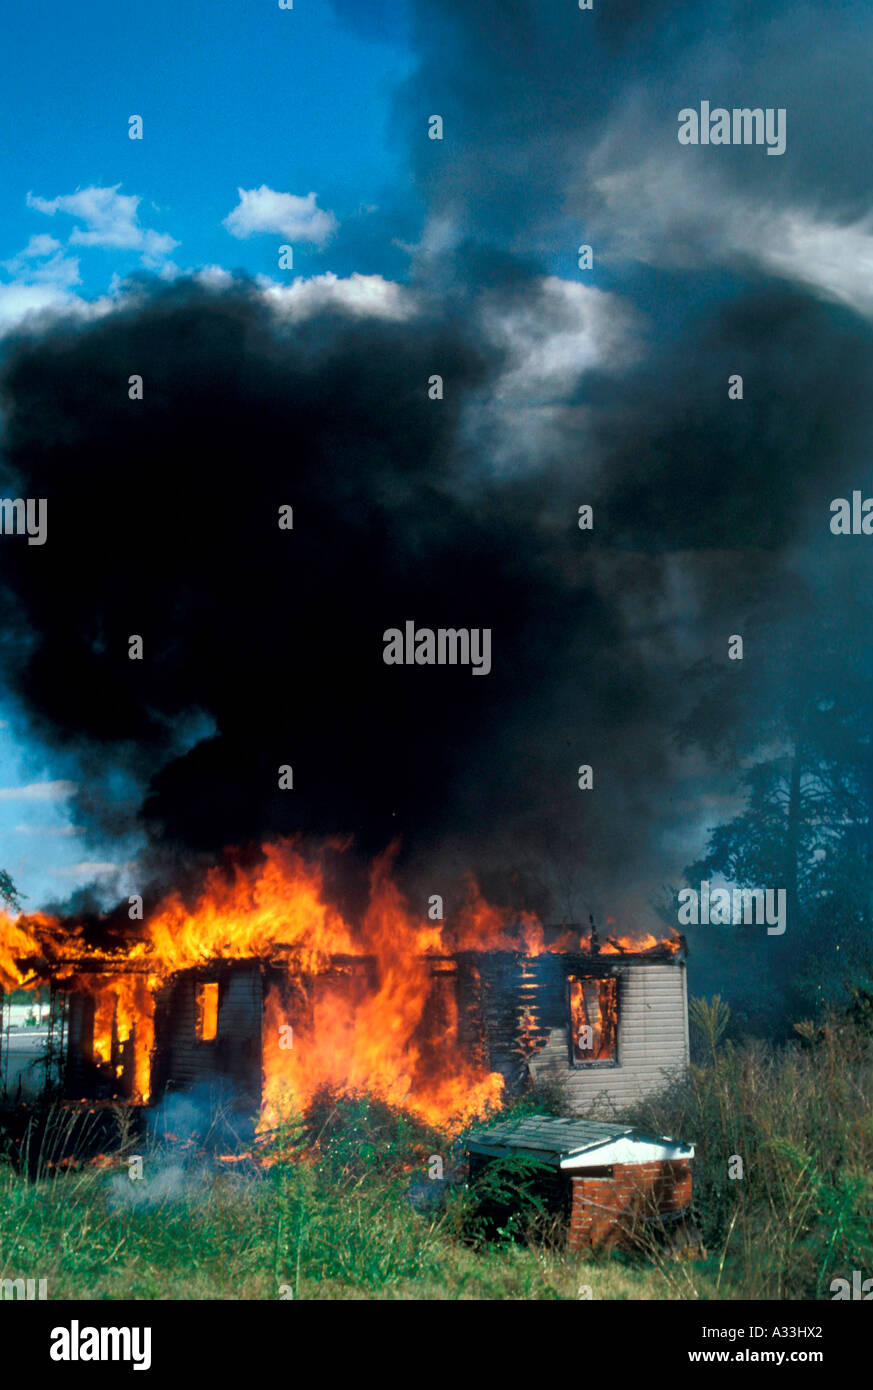 Building fire disaster Stock Photo